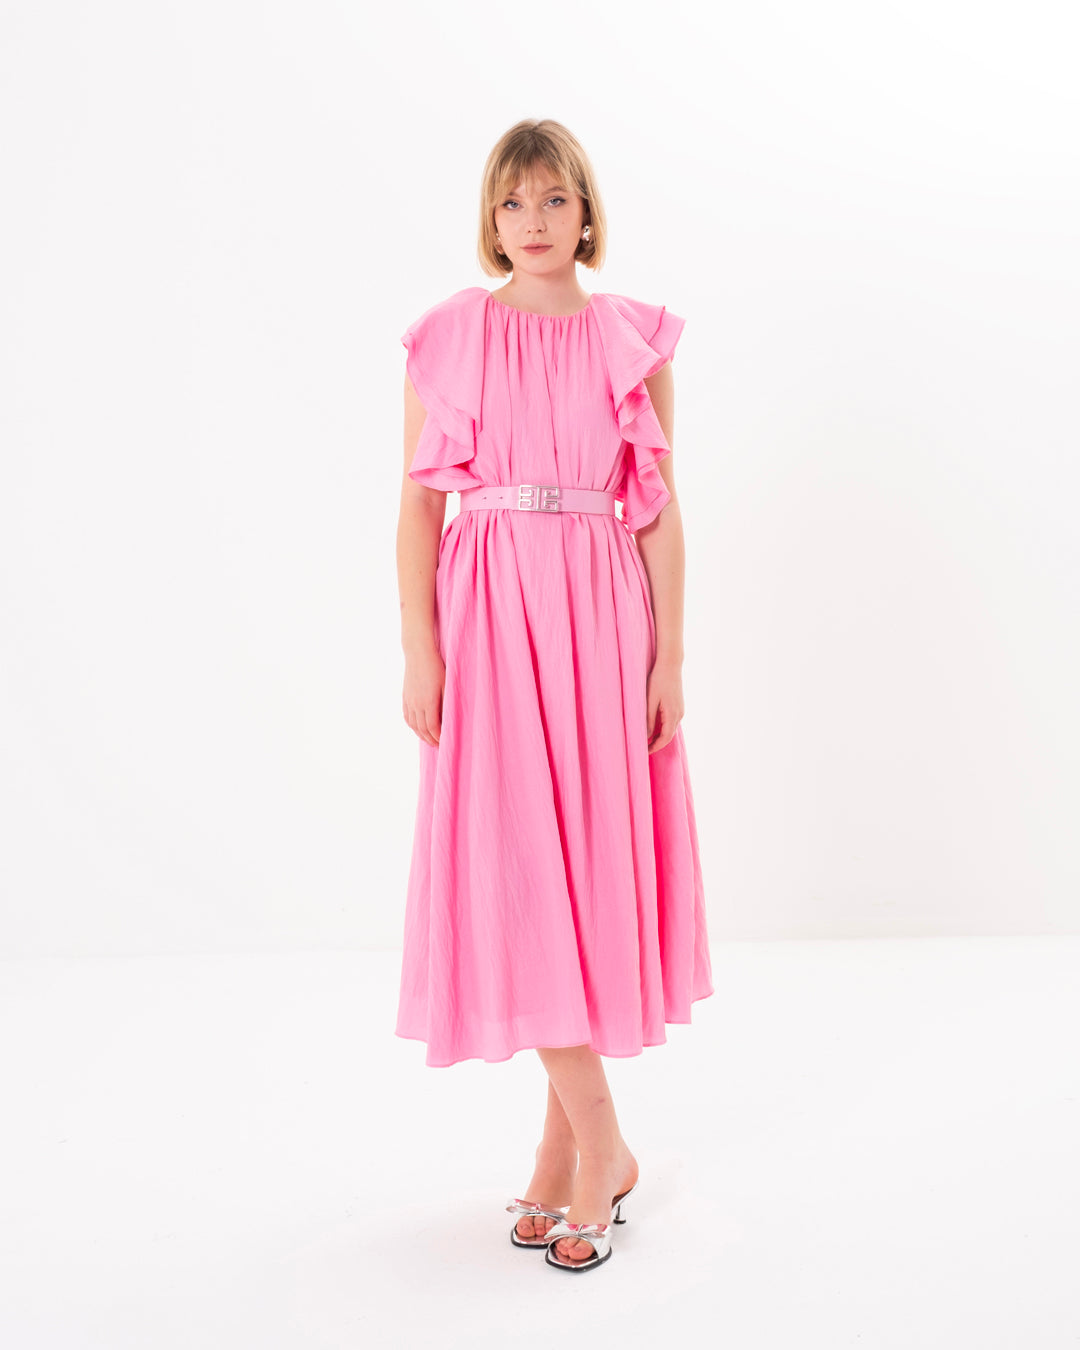 Belted Dress with Flounce Sleeves and Lined Inside